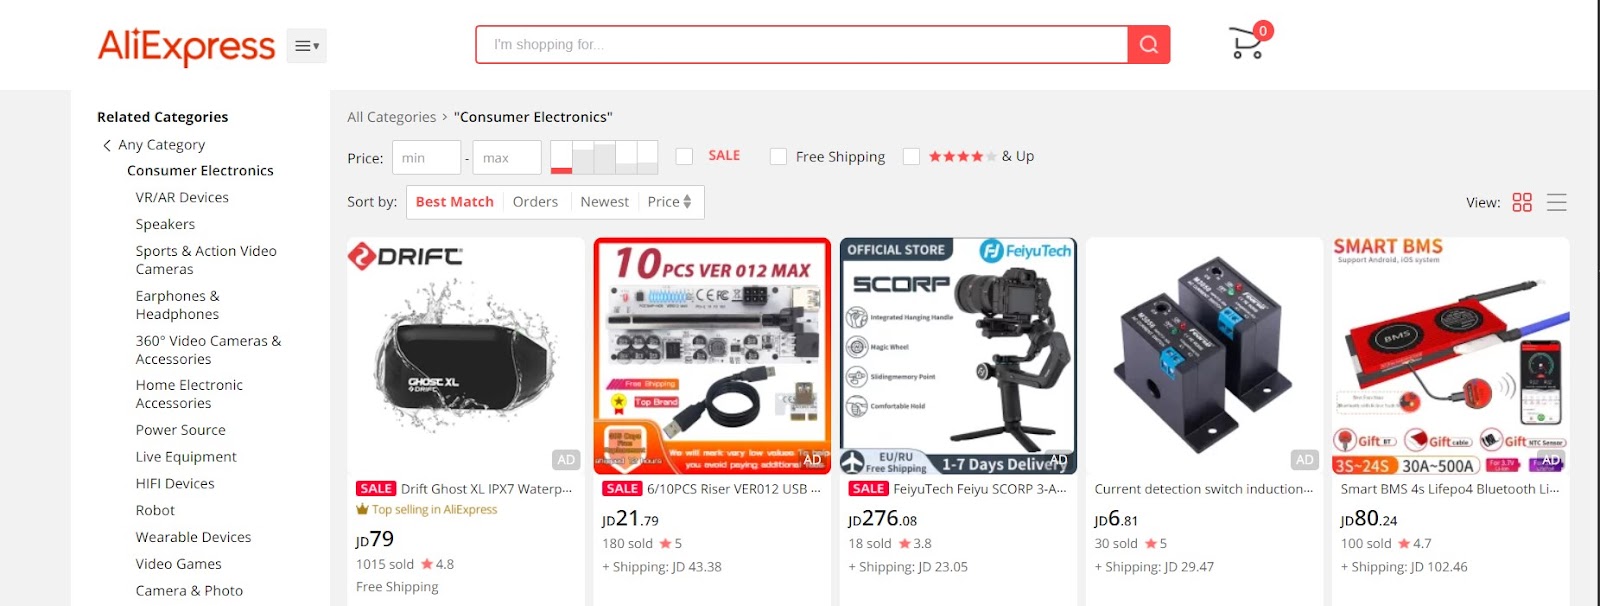 Get your AliExpress promo code to shop at AliExpress UAE, KSA and more.